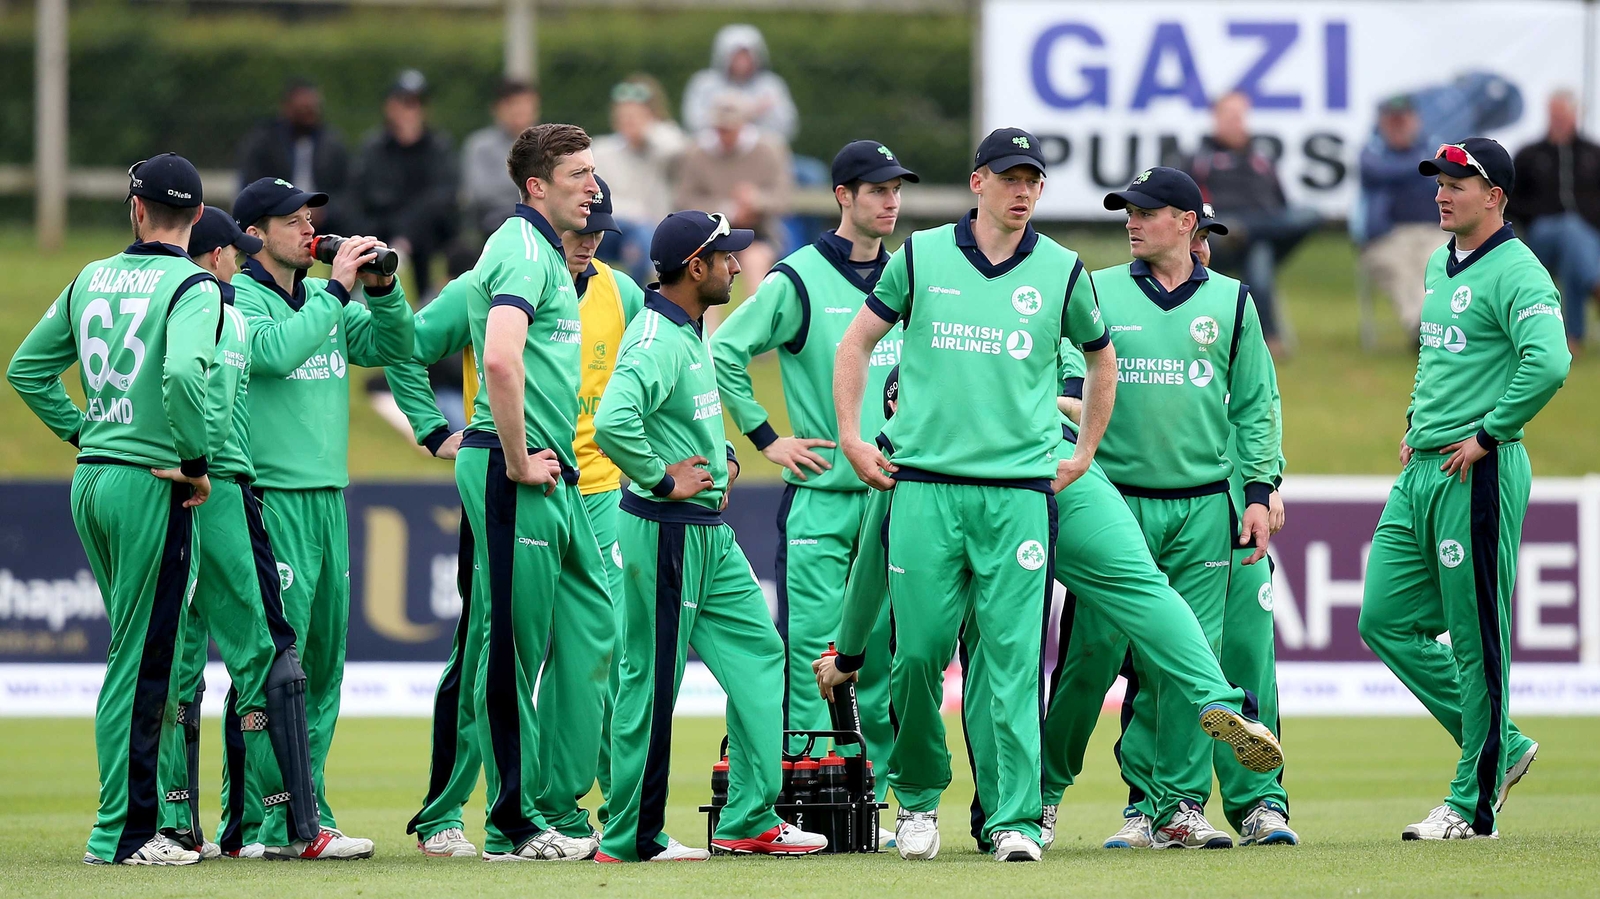 Ireland announce 16-man squad for ODI series against UAE and Afghanistan